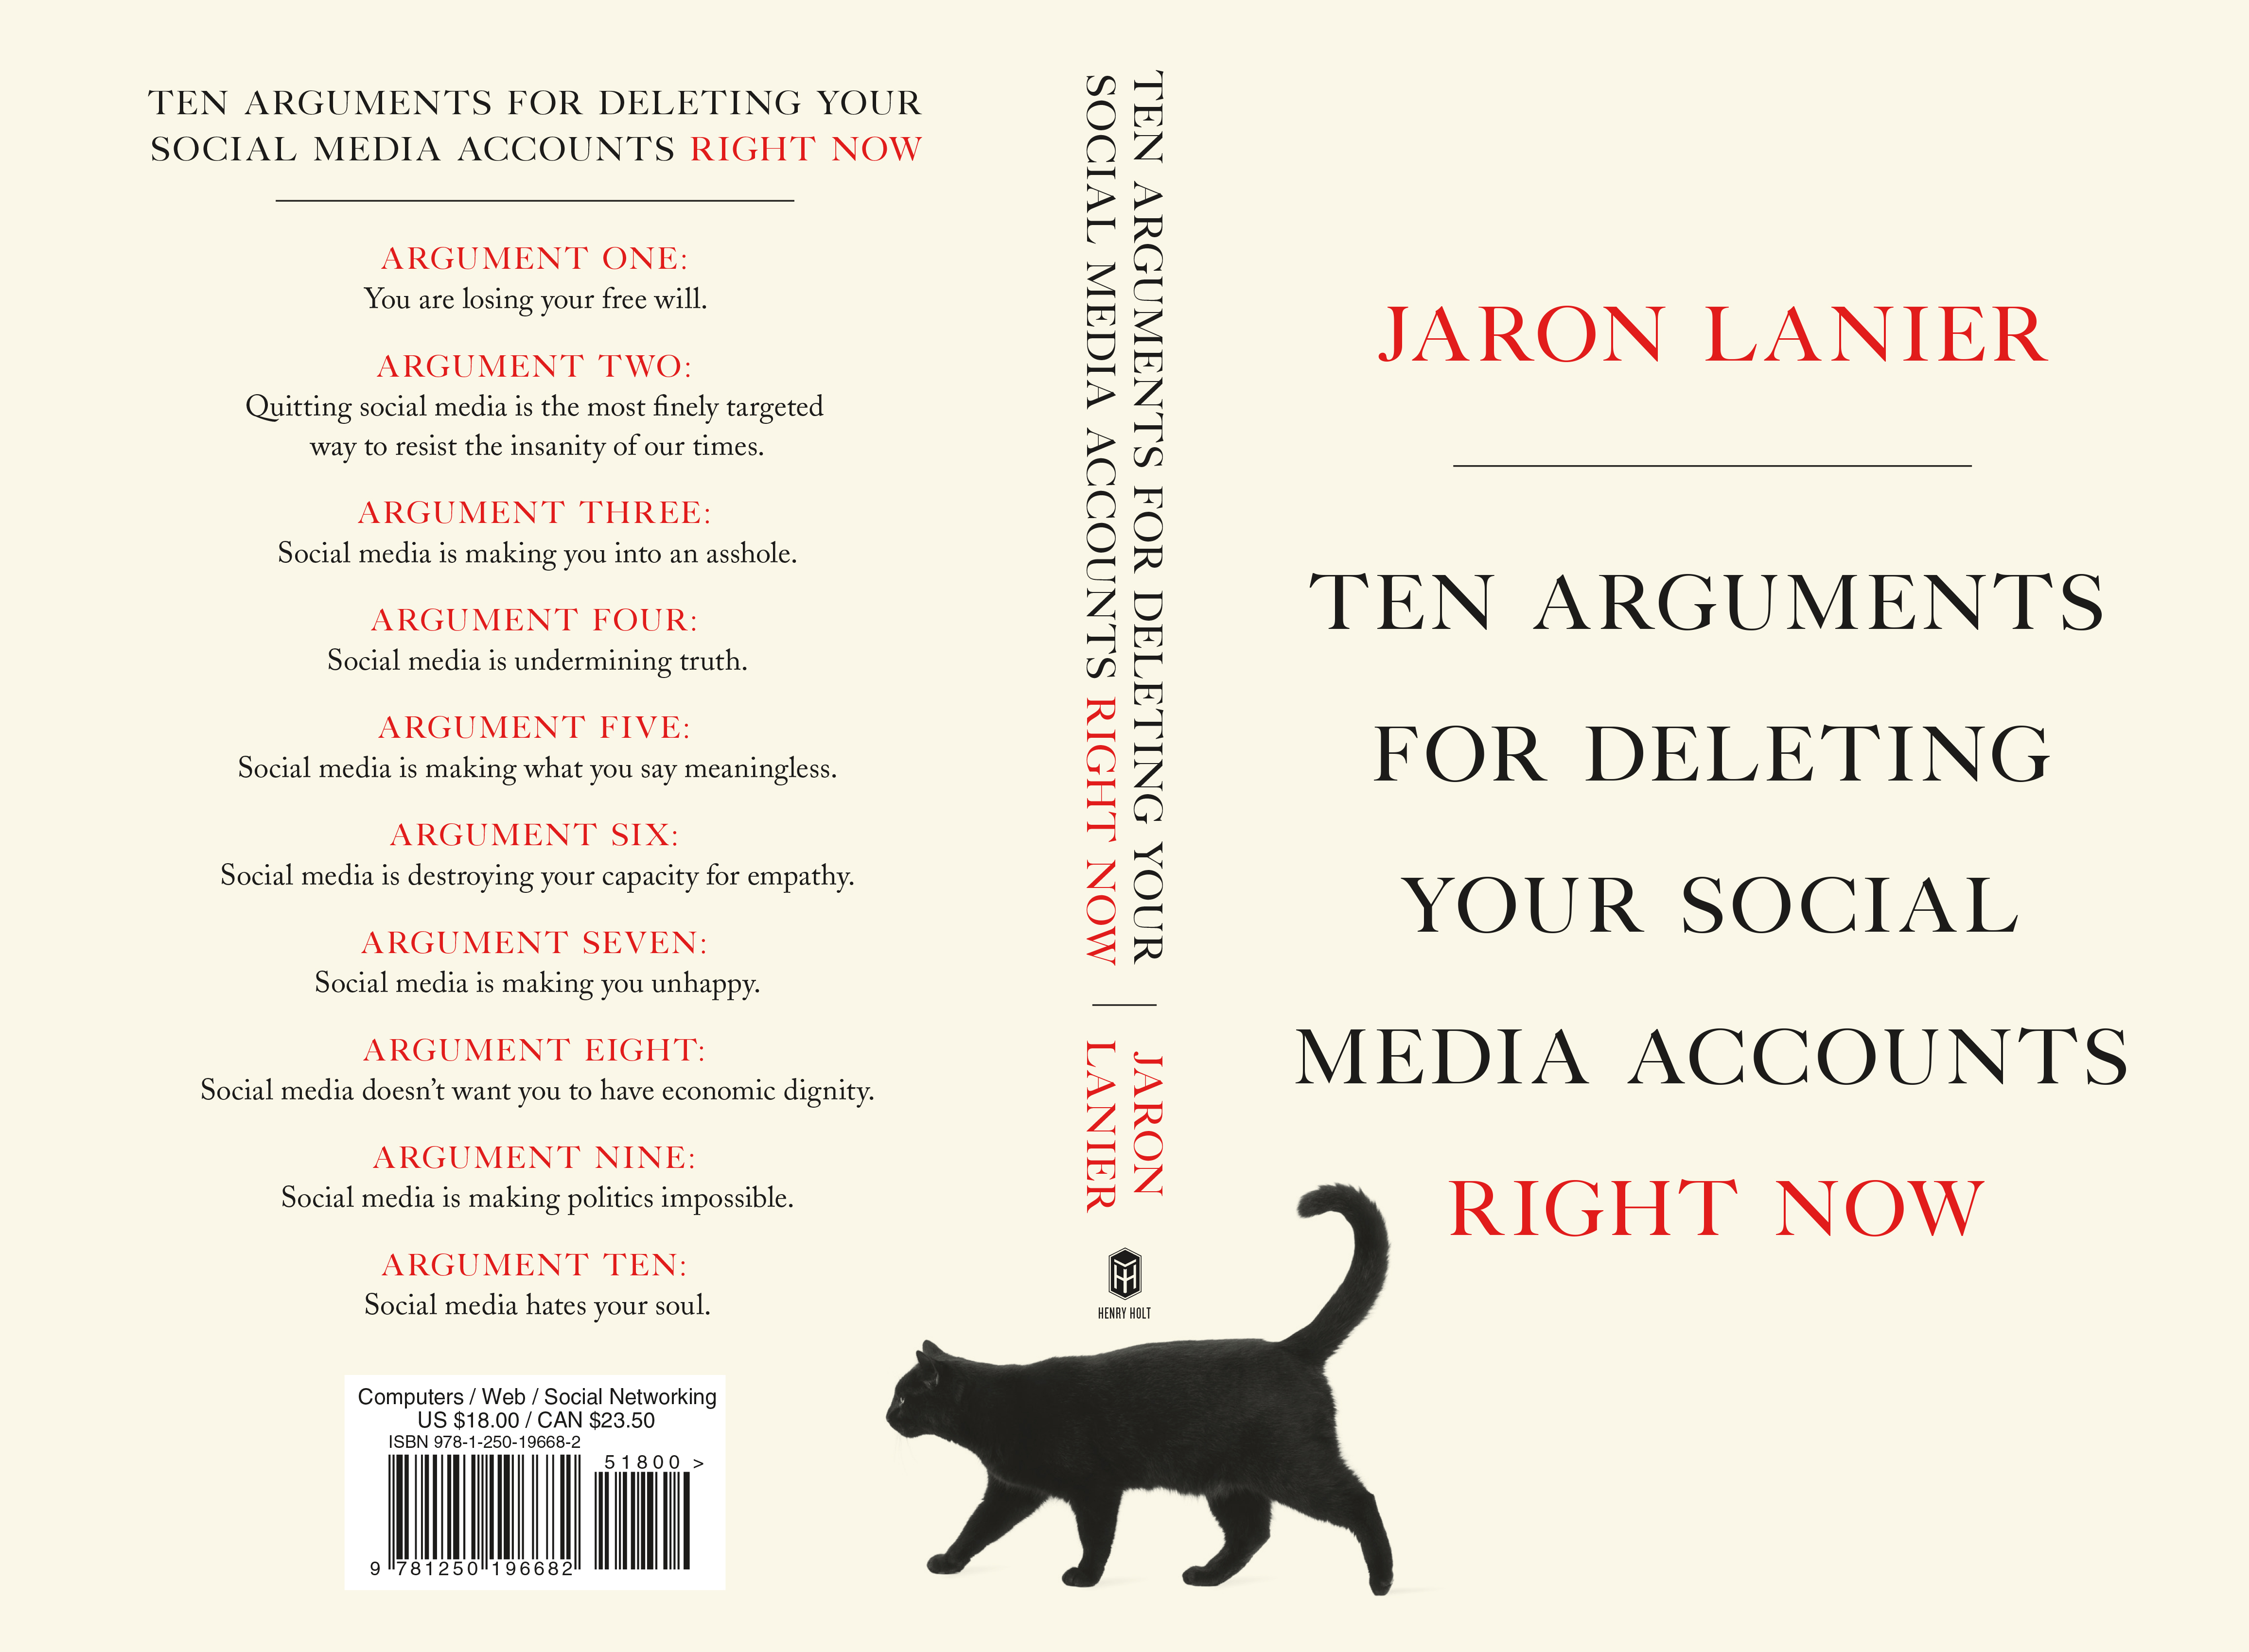 USA edition of Ten Arguments for Deleting Your Social Media Accounts Right Now